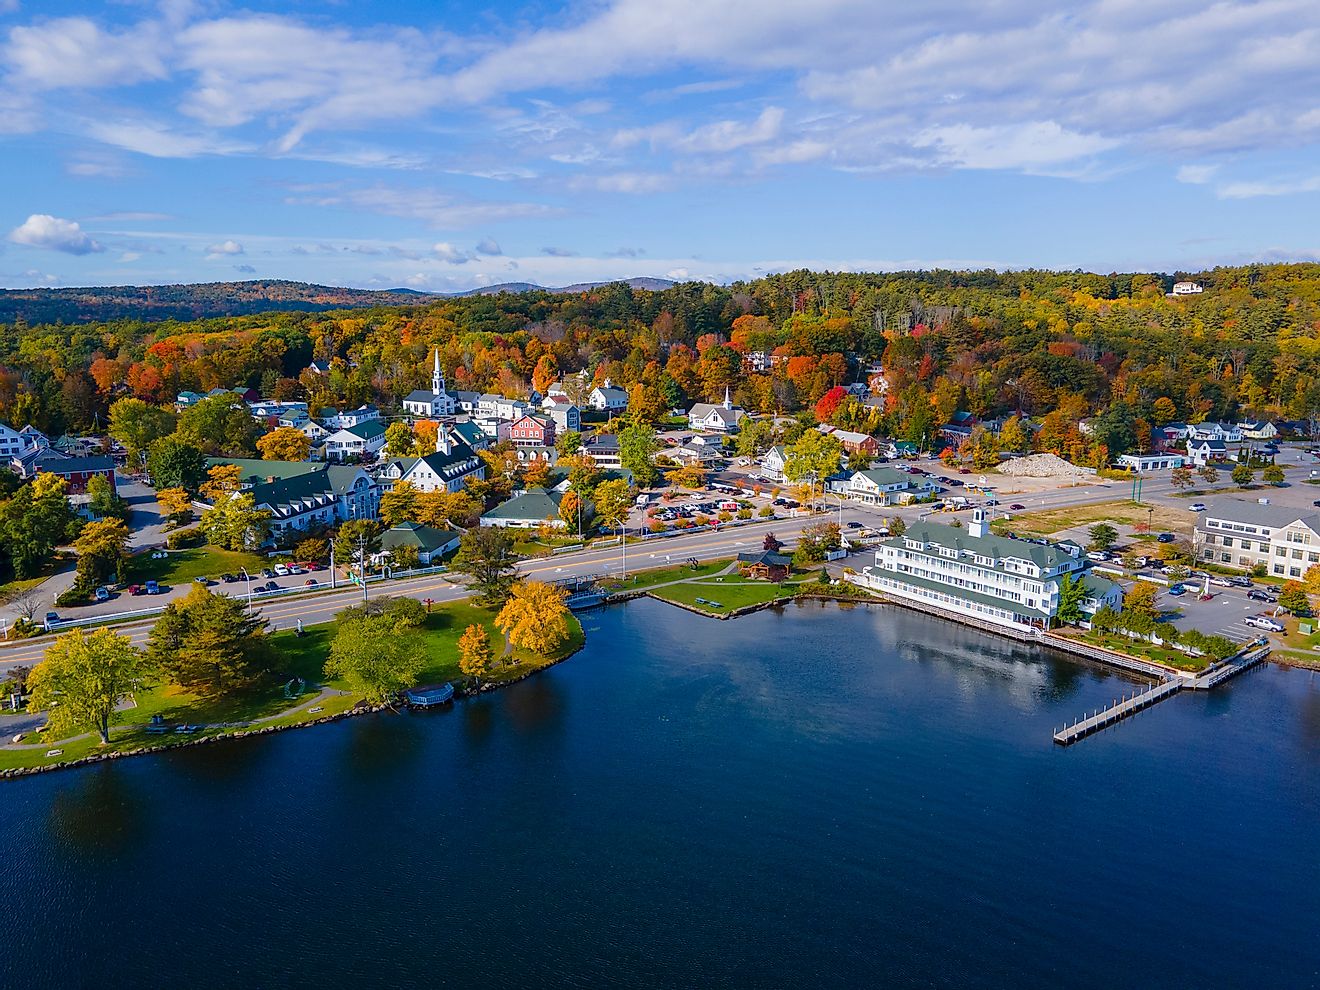 Aerial view of Meredith, New Hampshire.